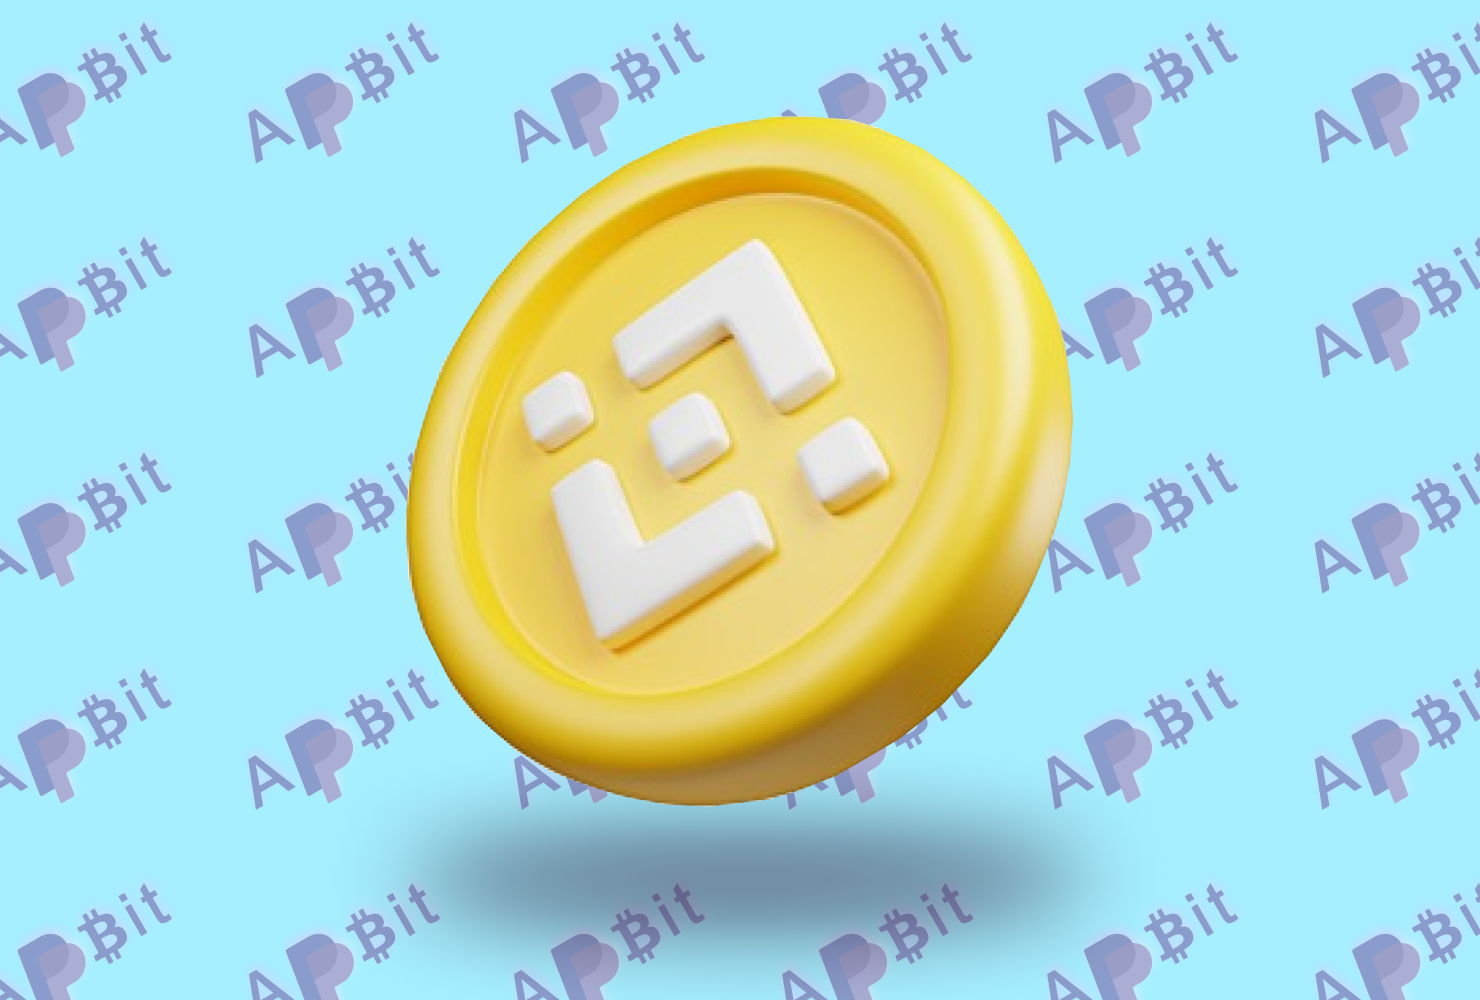 images/Binance (1).png